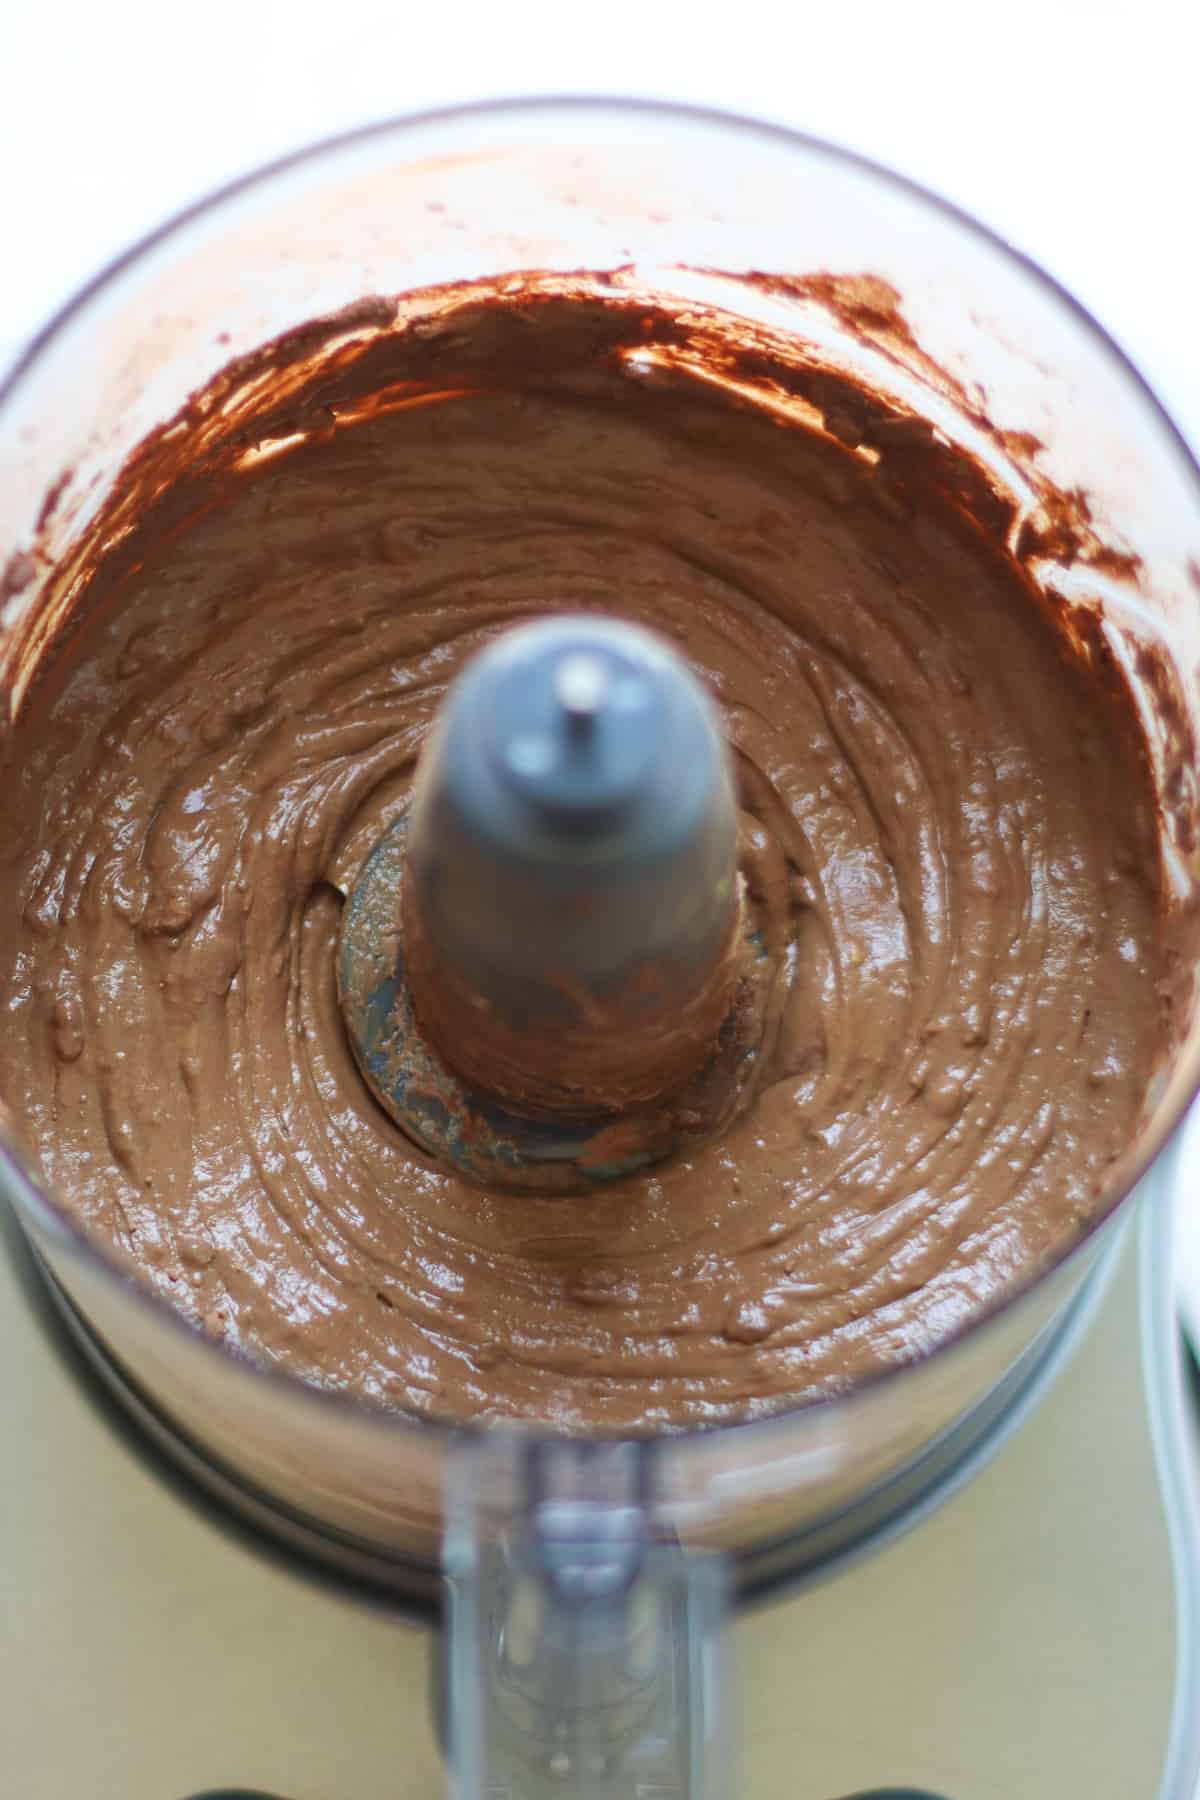 All the ingredients blended until smooth in the food processor.